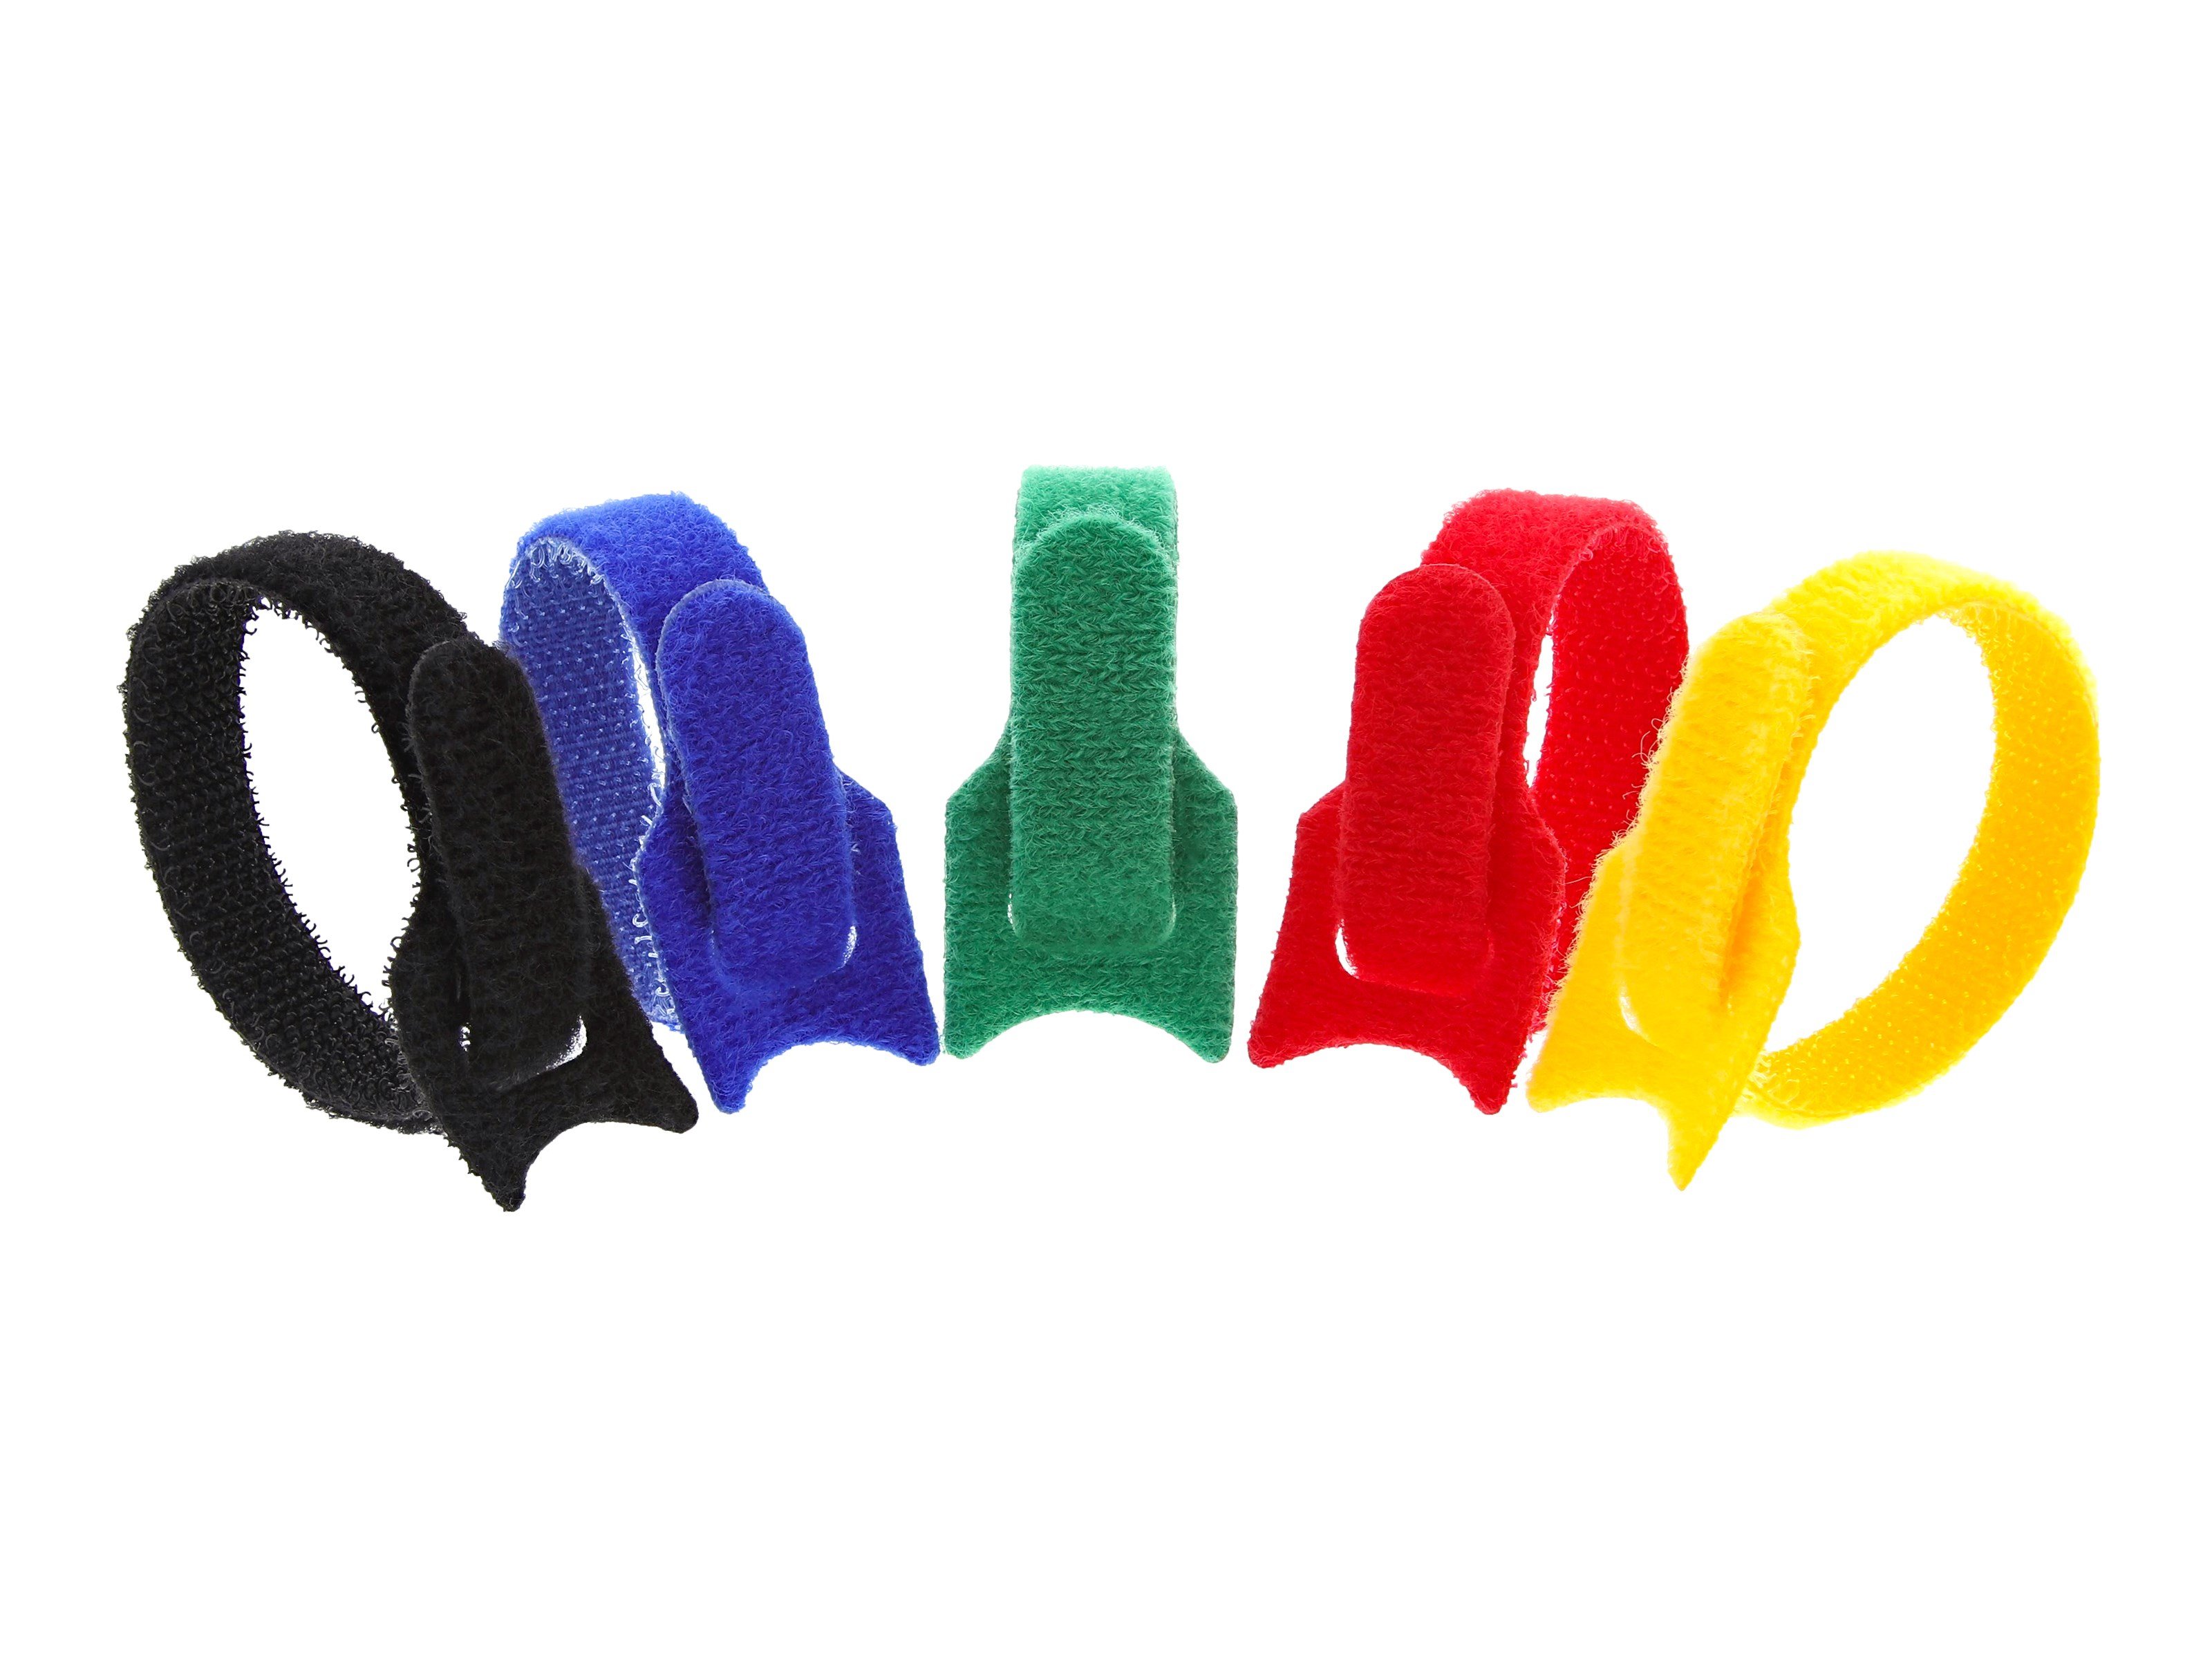 6 Inch Multi-colored Reuseable Tie Wraps - 10 Pack - Secure™ Cable